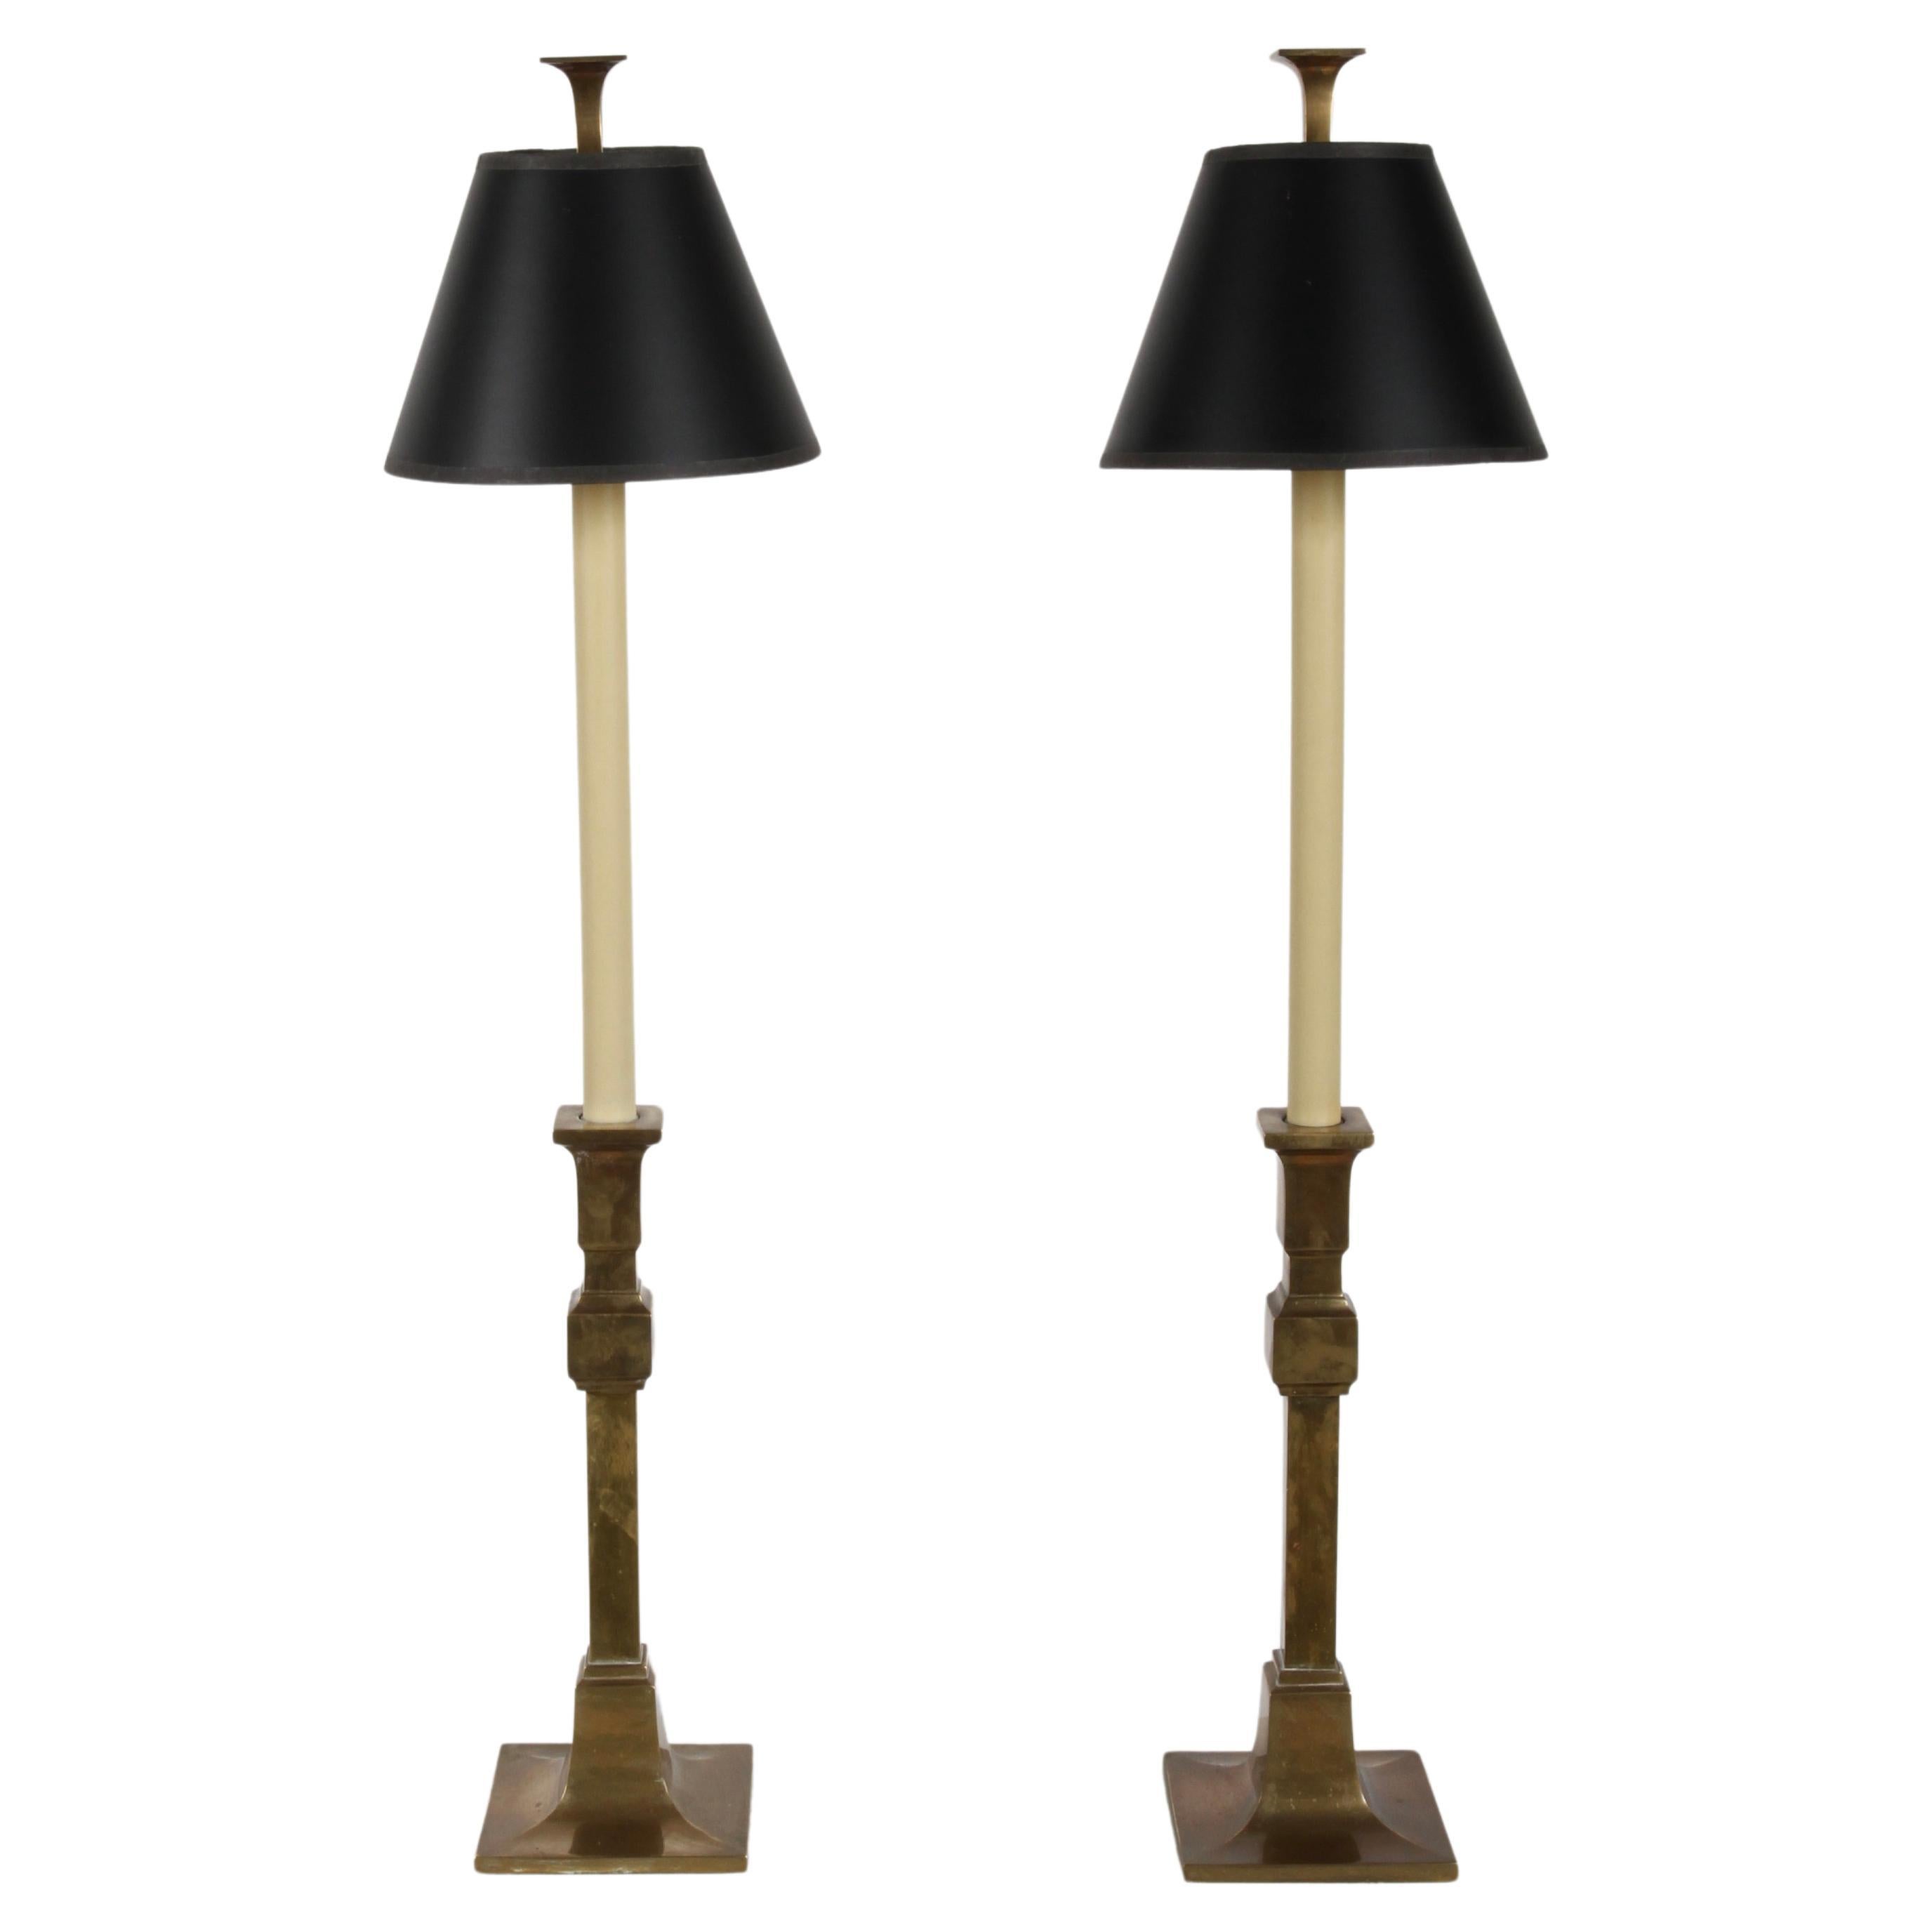 Pair of 1980s Chapman Lamp Co. Tall Brass Candlestick Table Lamps - Black Shades